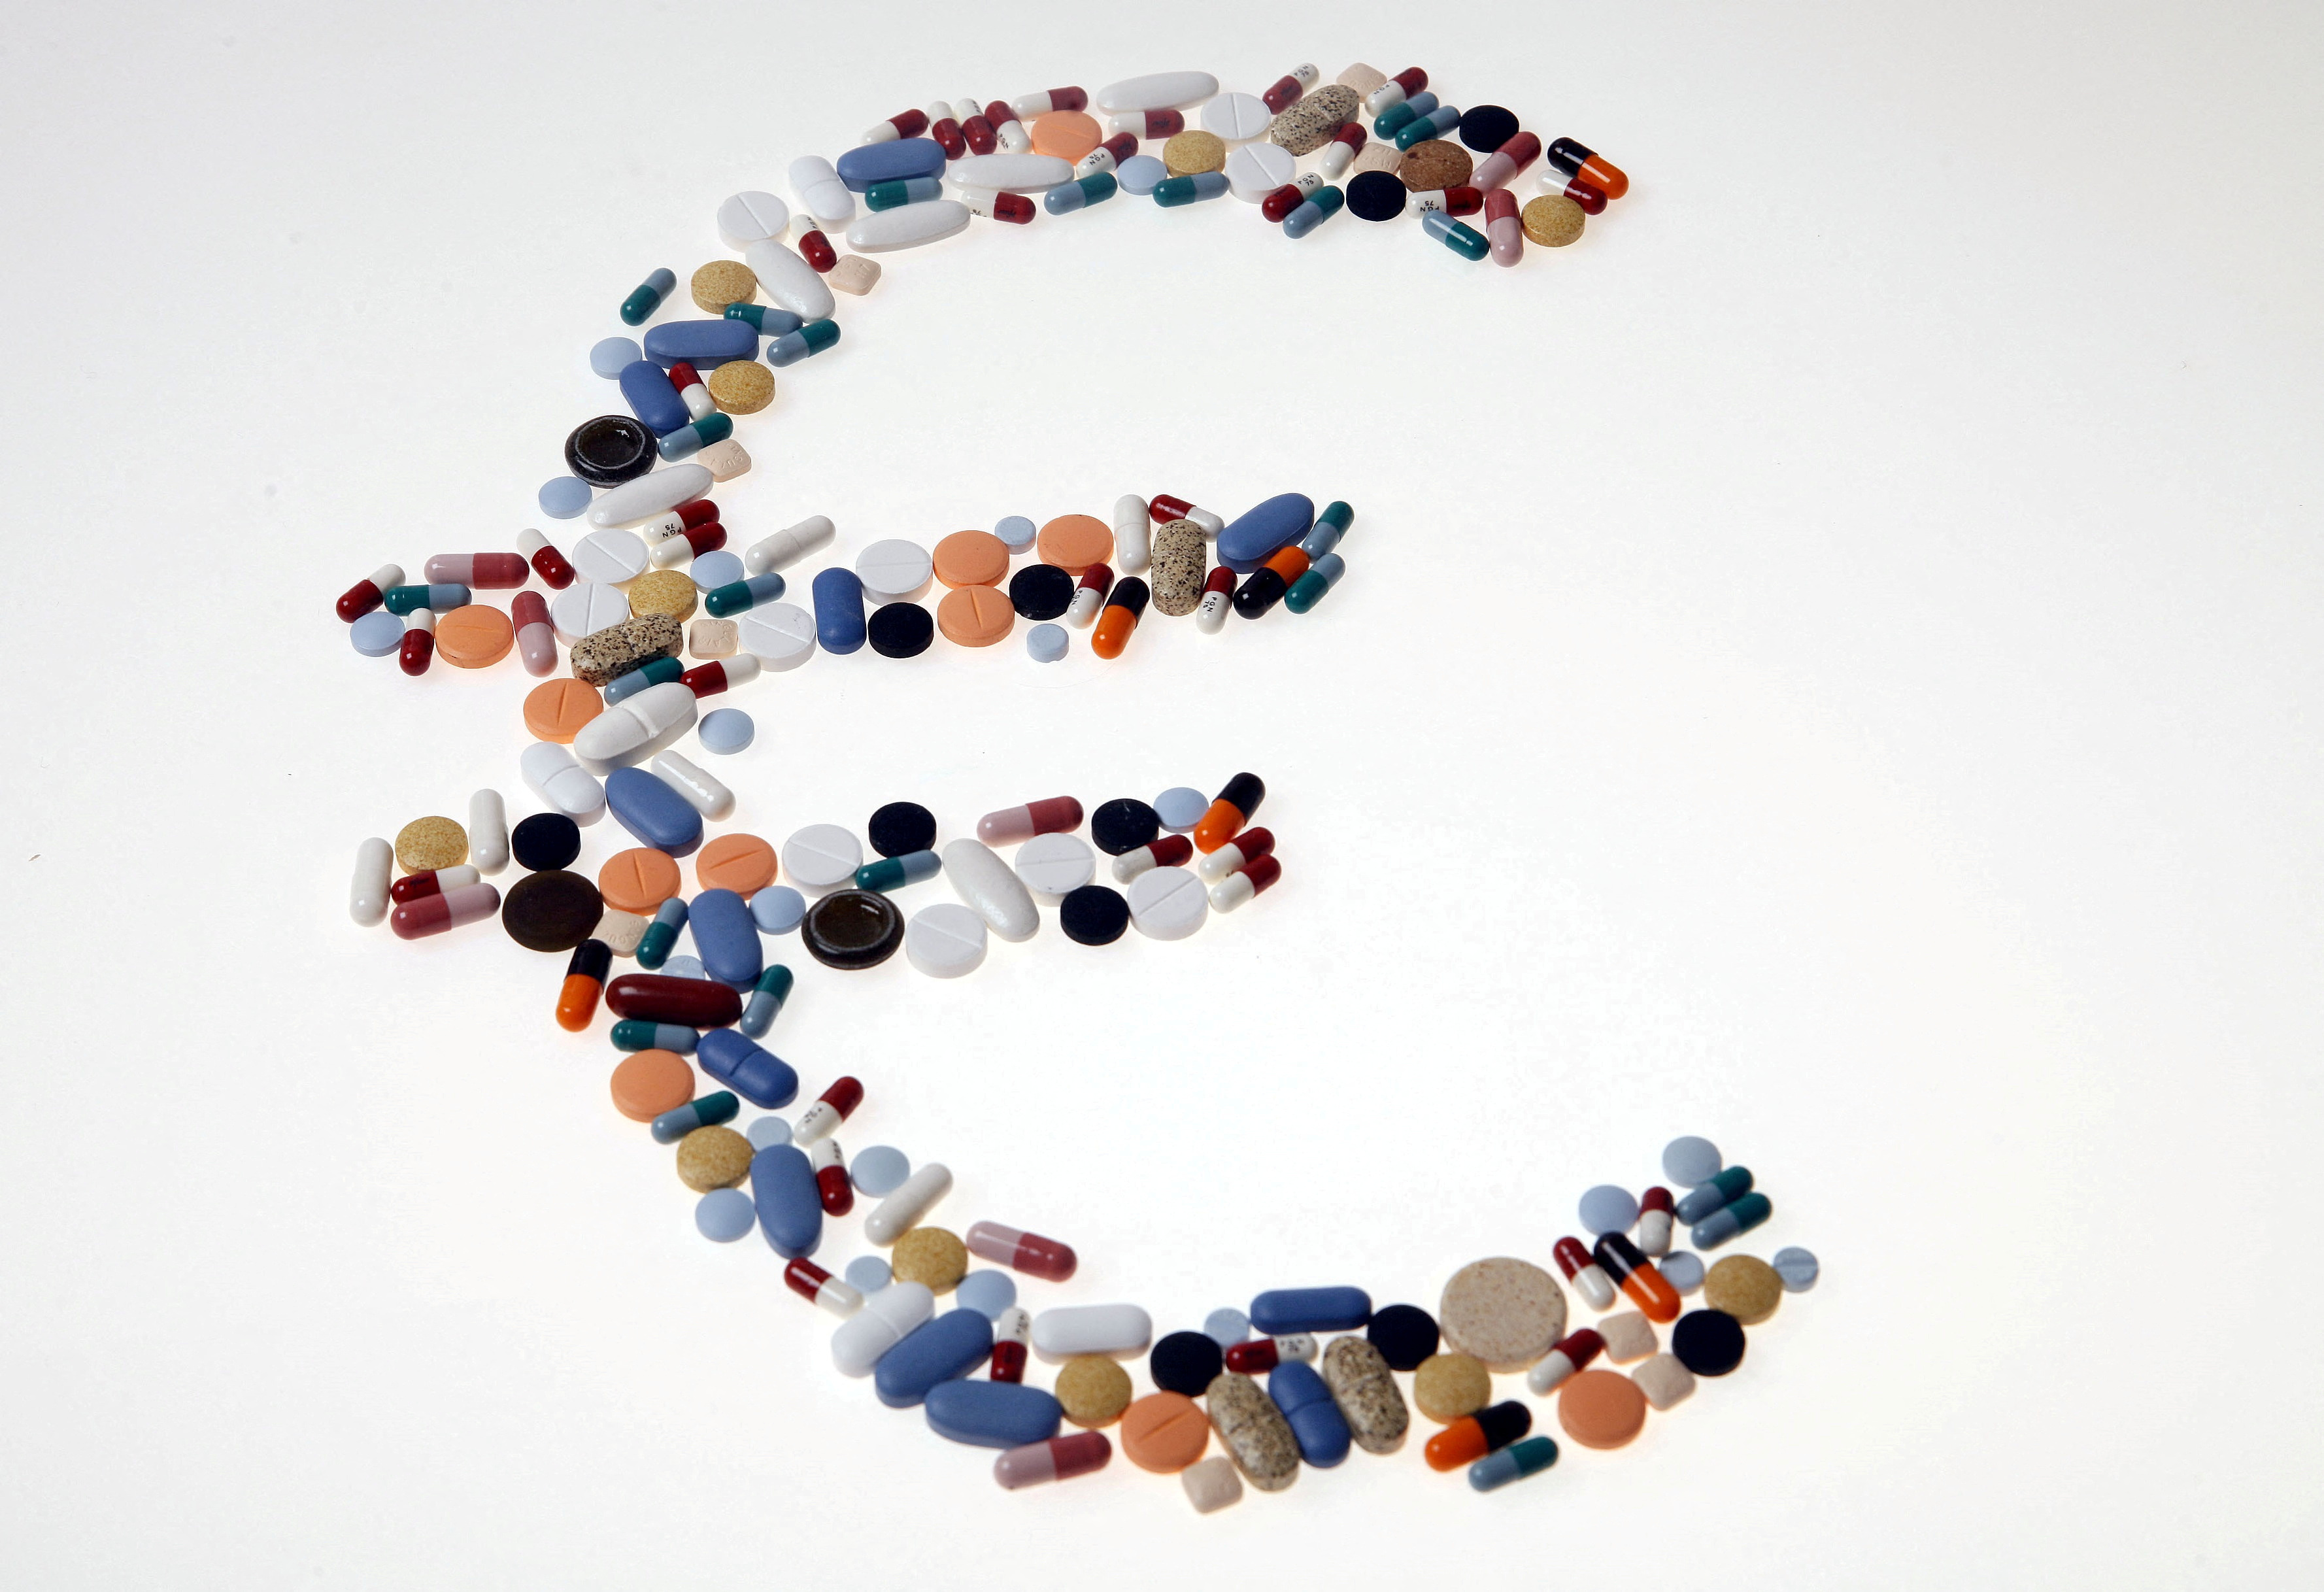 Pharmaceutical tablets and capsules are arranged on a table in this picture illustration